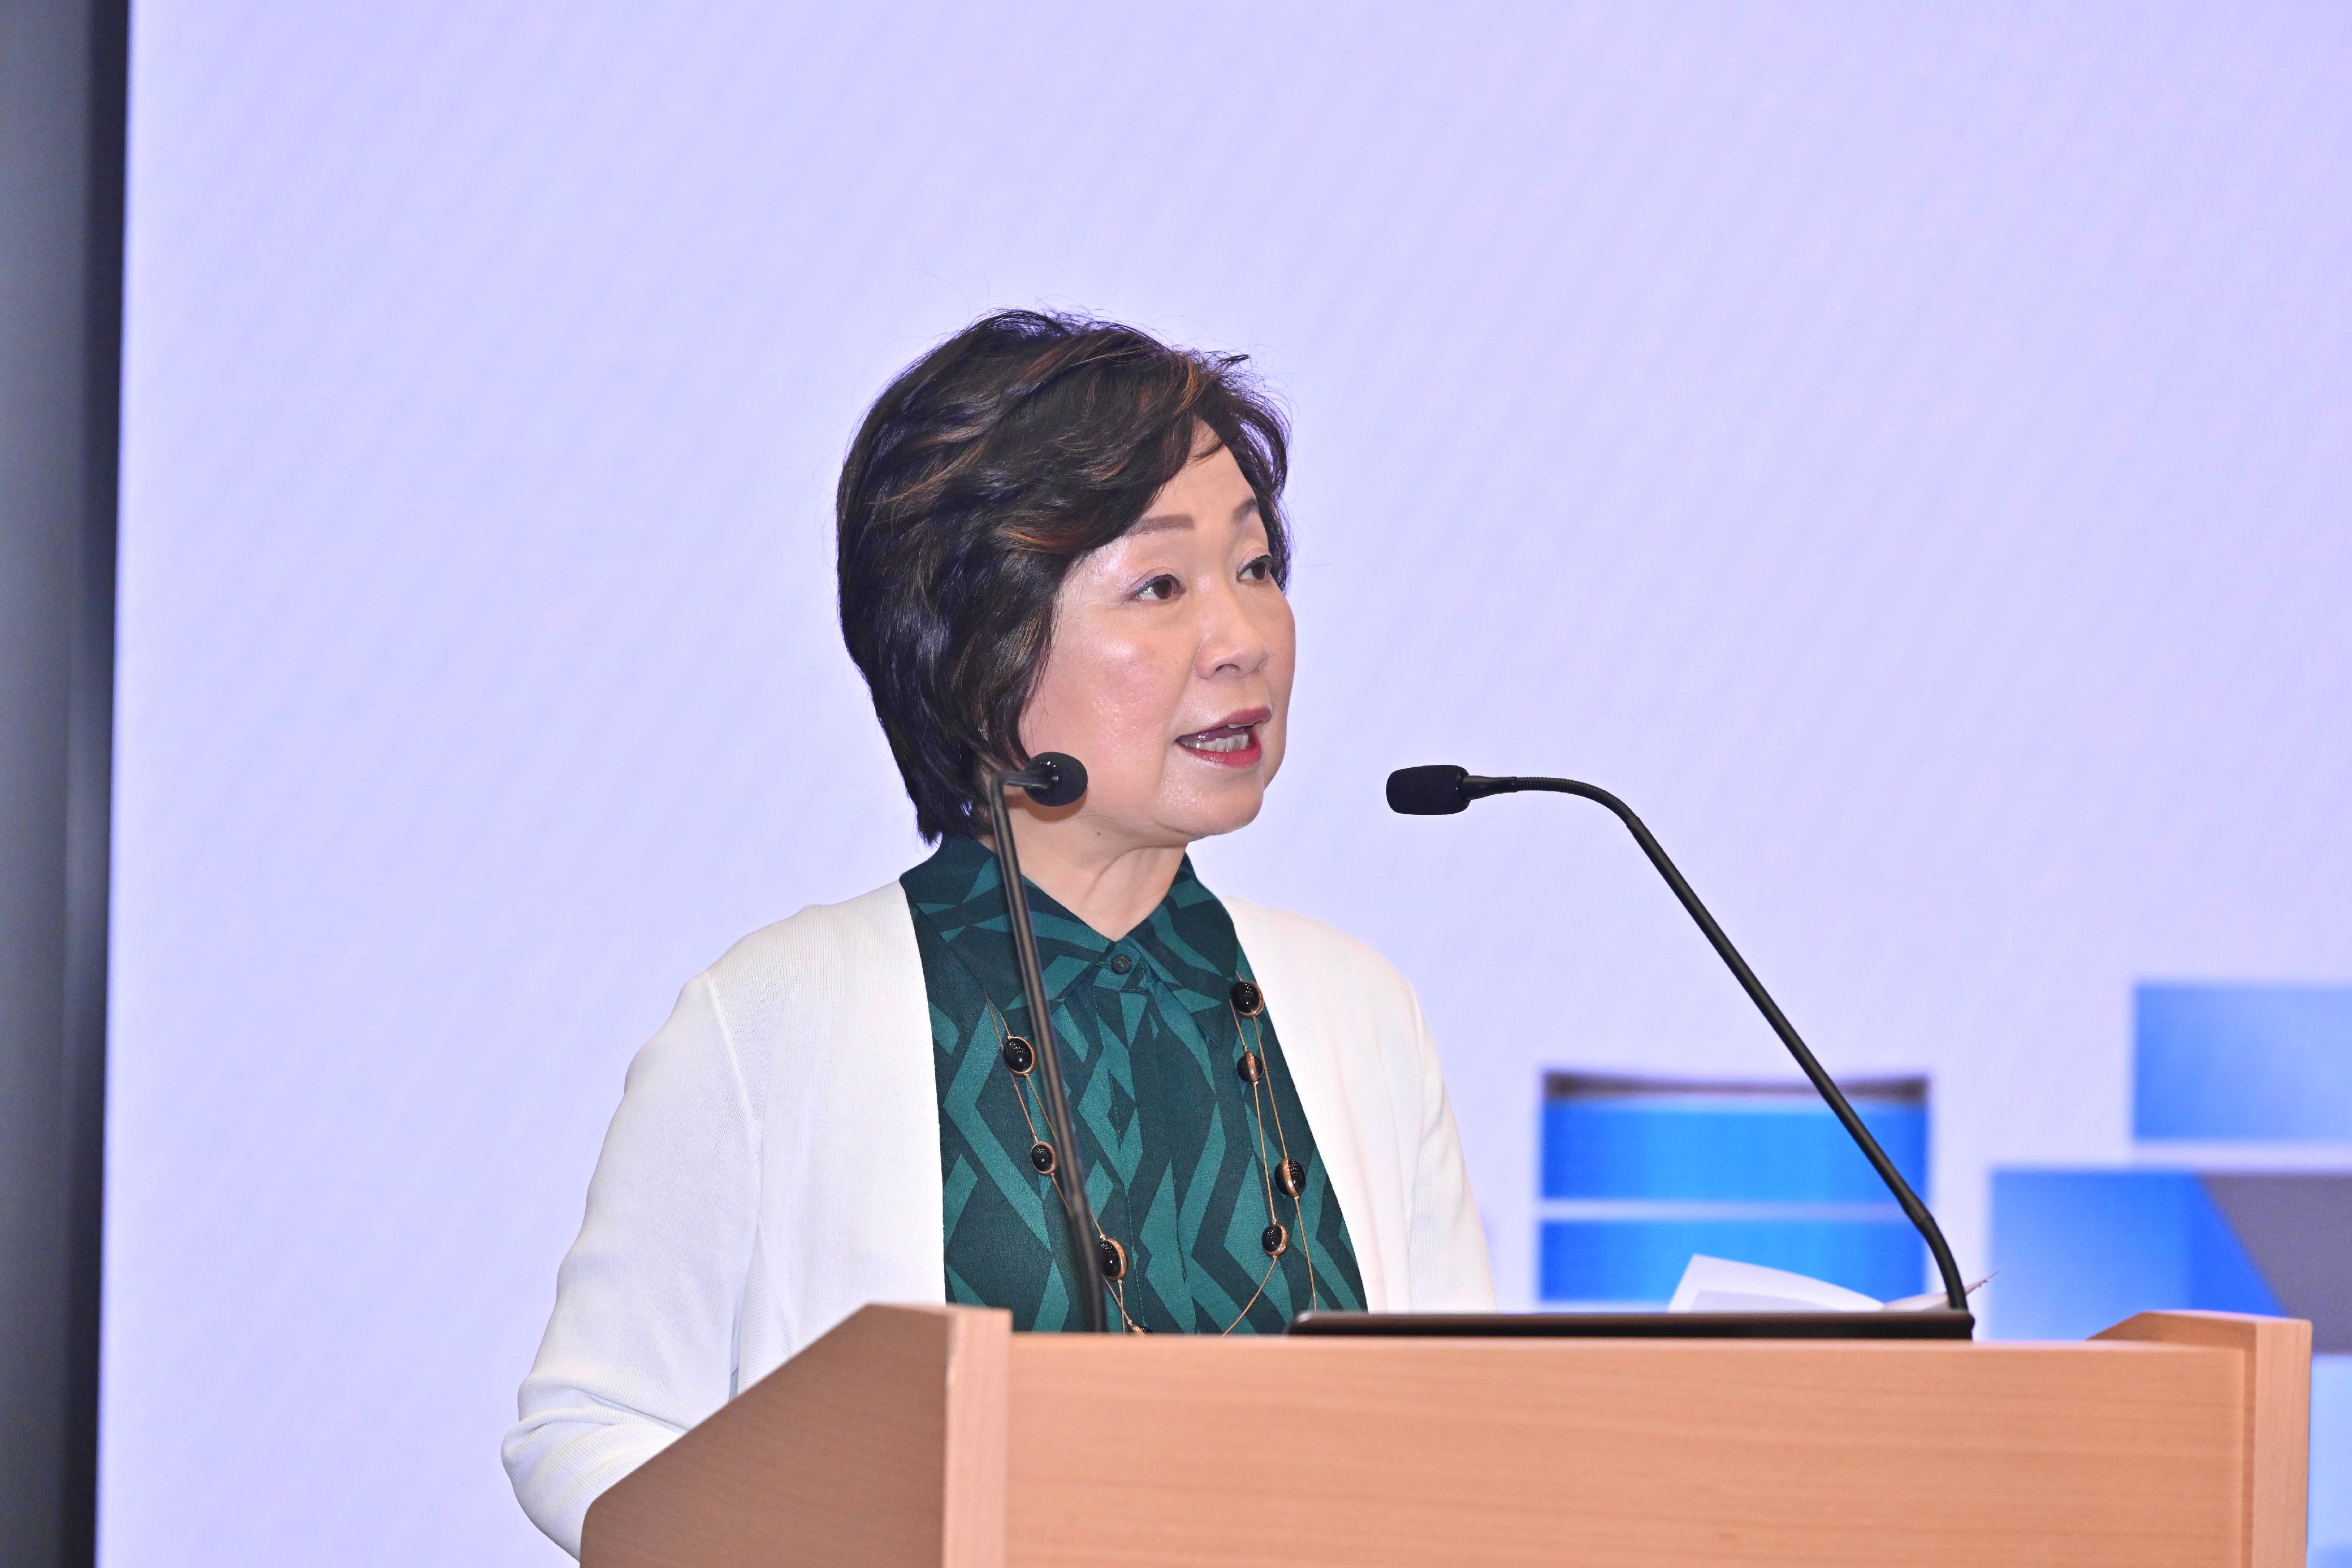 The Secretary for Education, Dr Choi Yuk-lin, speaks at the sharing session on the "Important spirit of President Xi Jinping's reply letter to Hong Kong students" today (October 28).